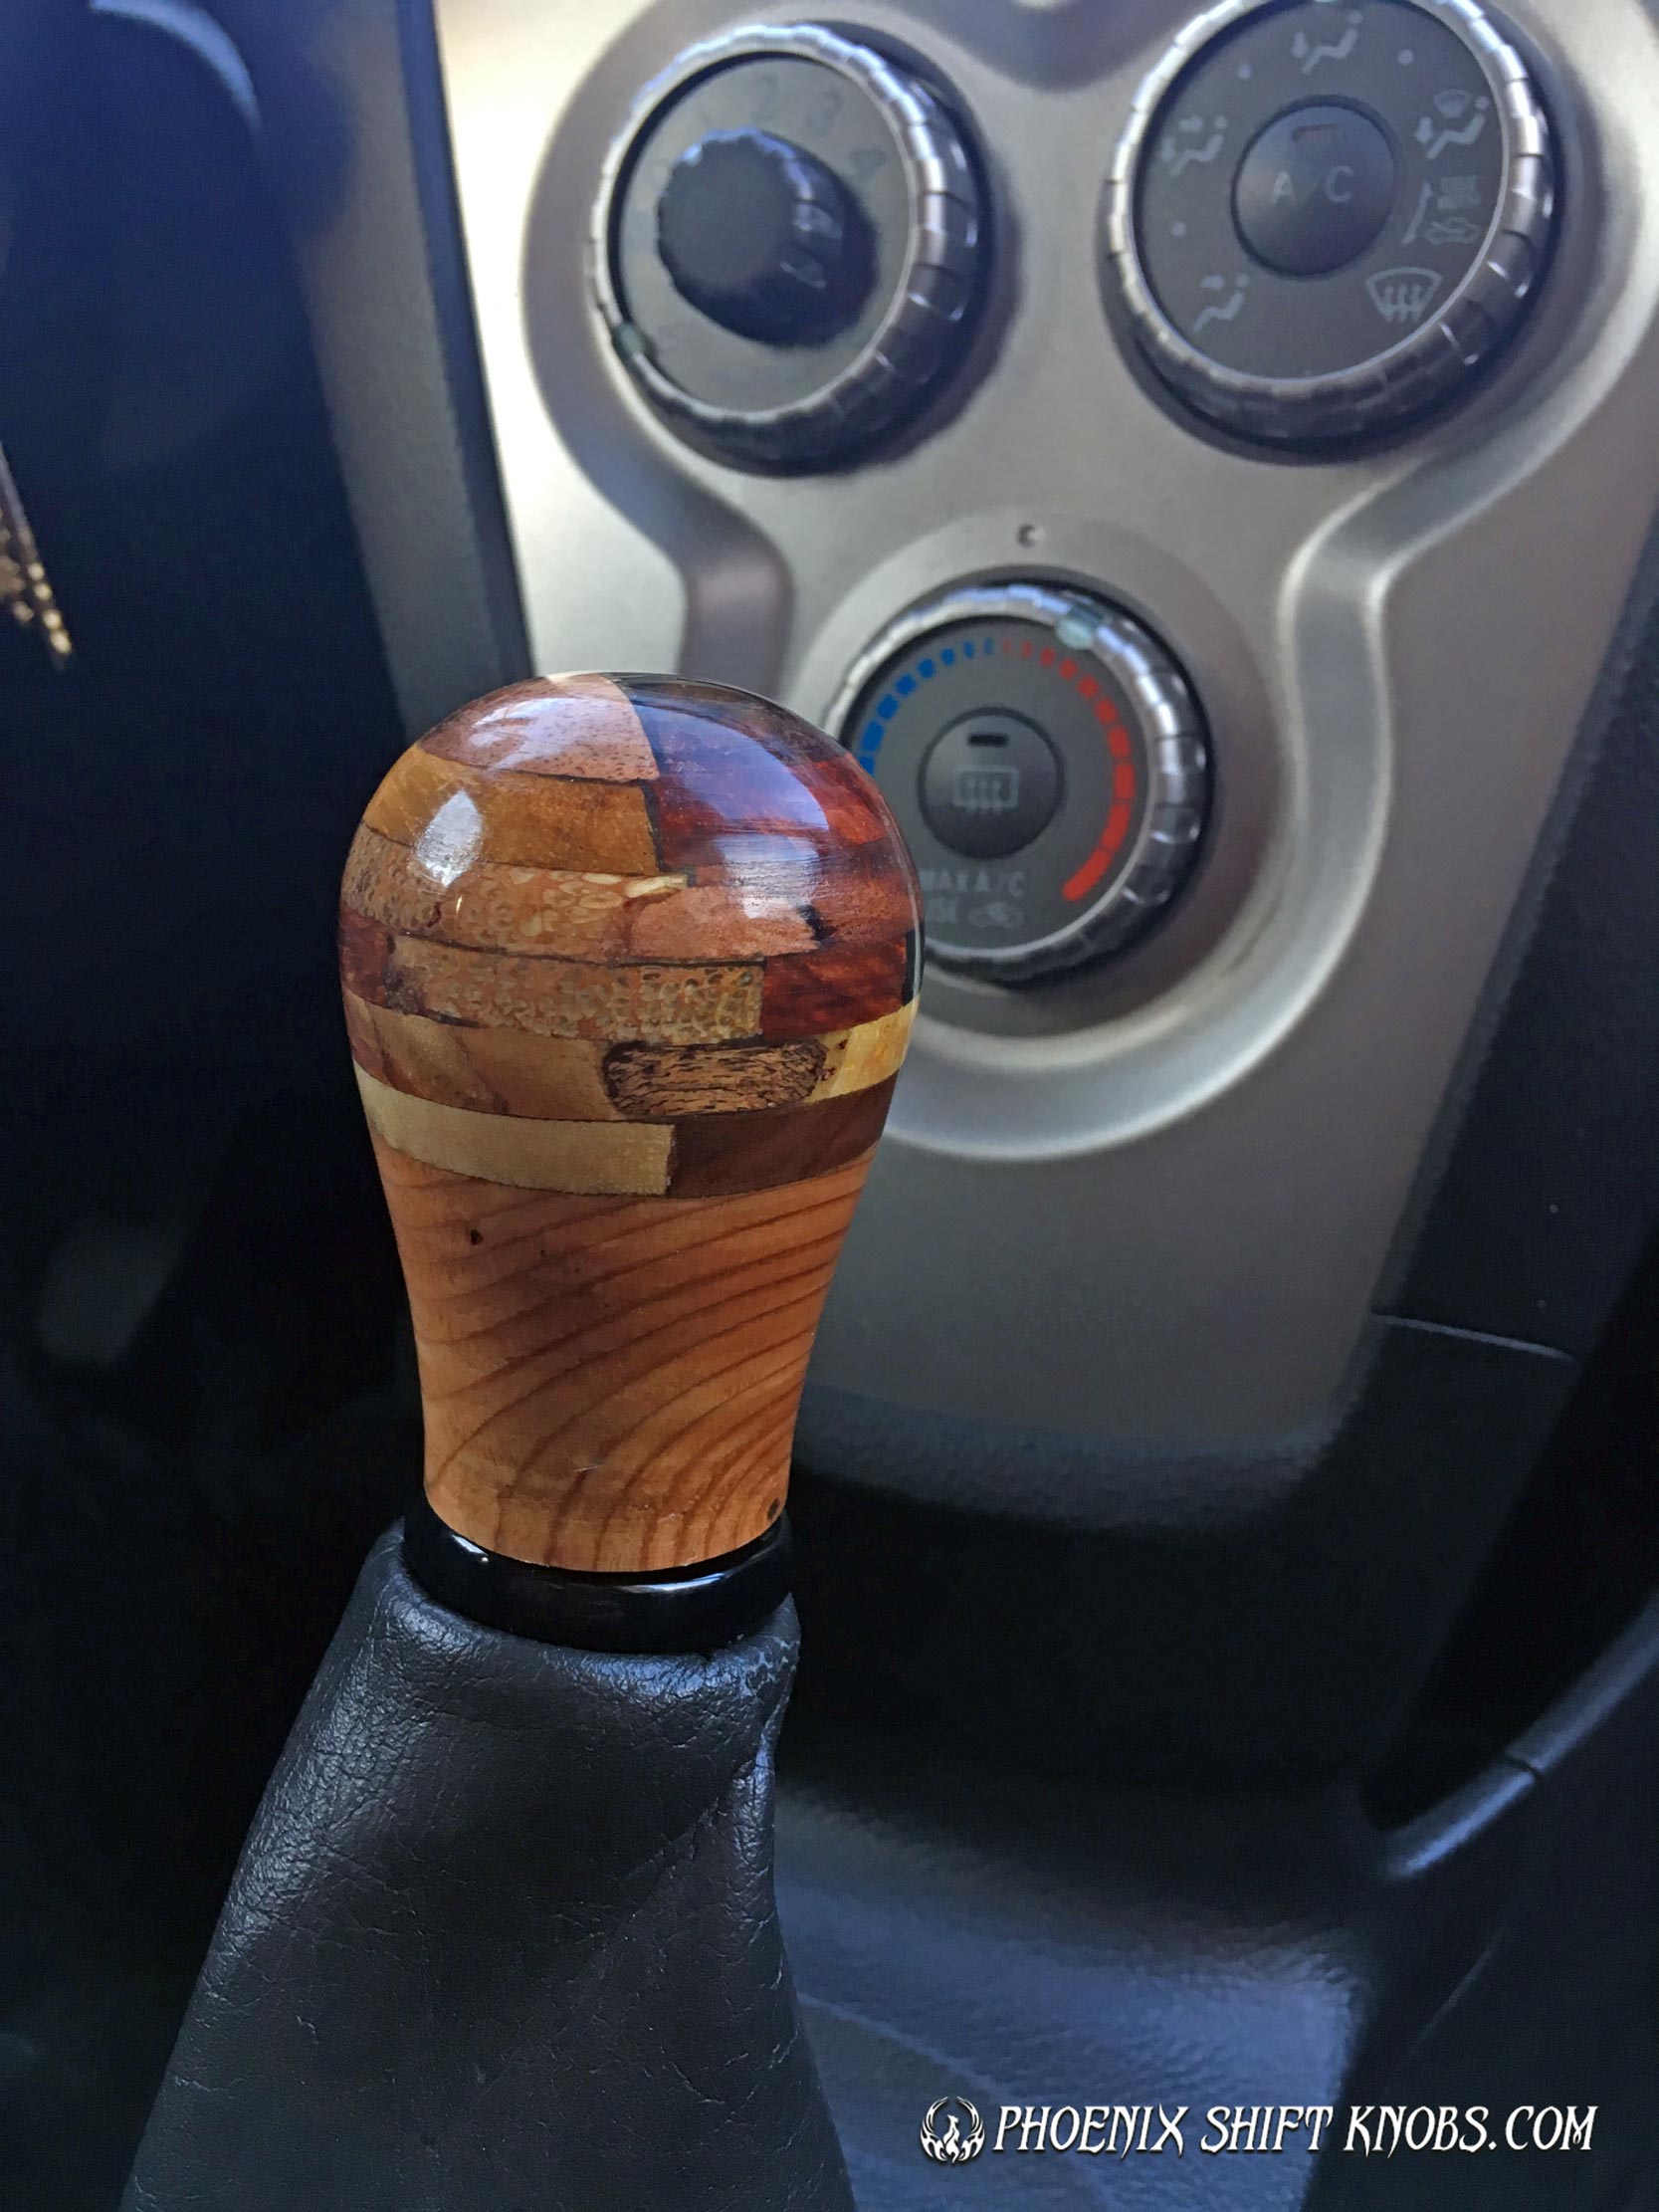 Photos of Wood Shifter Knobs.